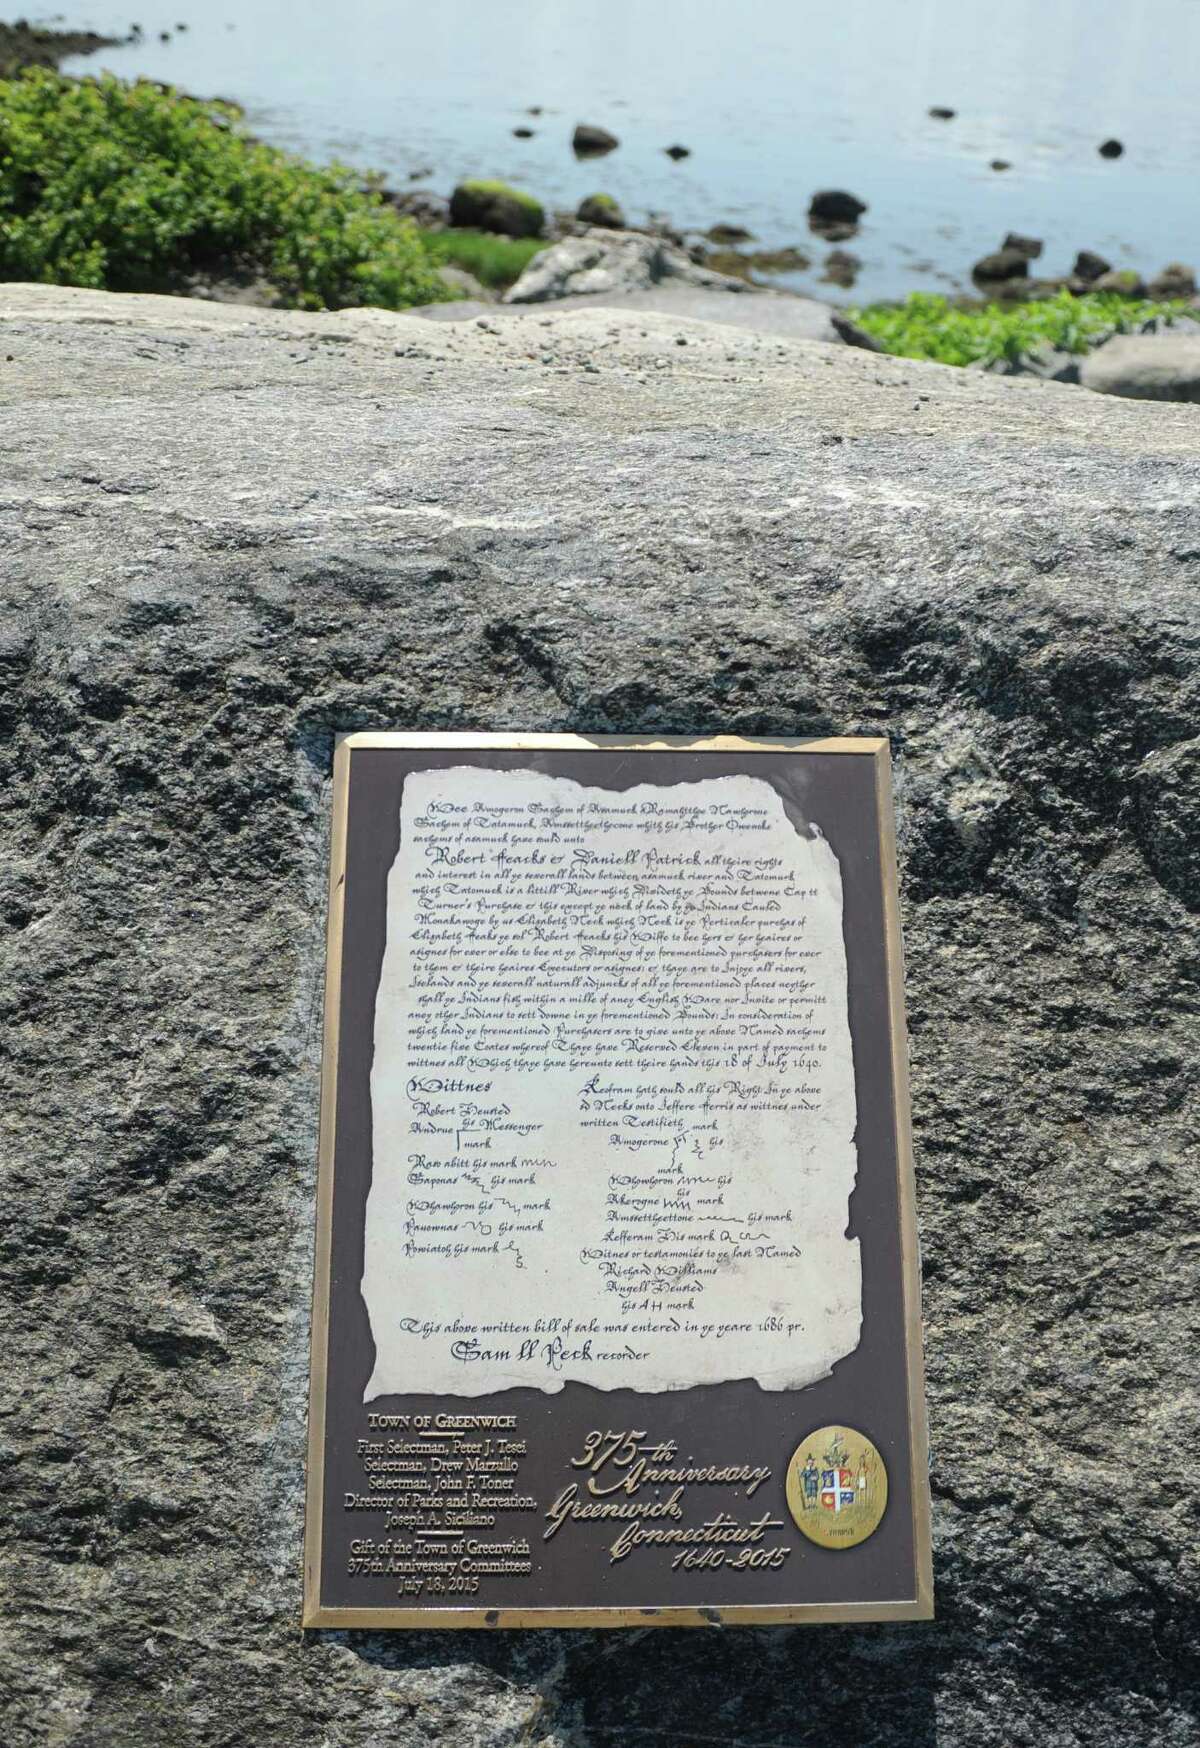 A new bronze replica of the original town deed is displayed on a rock at Tod’s Point.